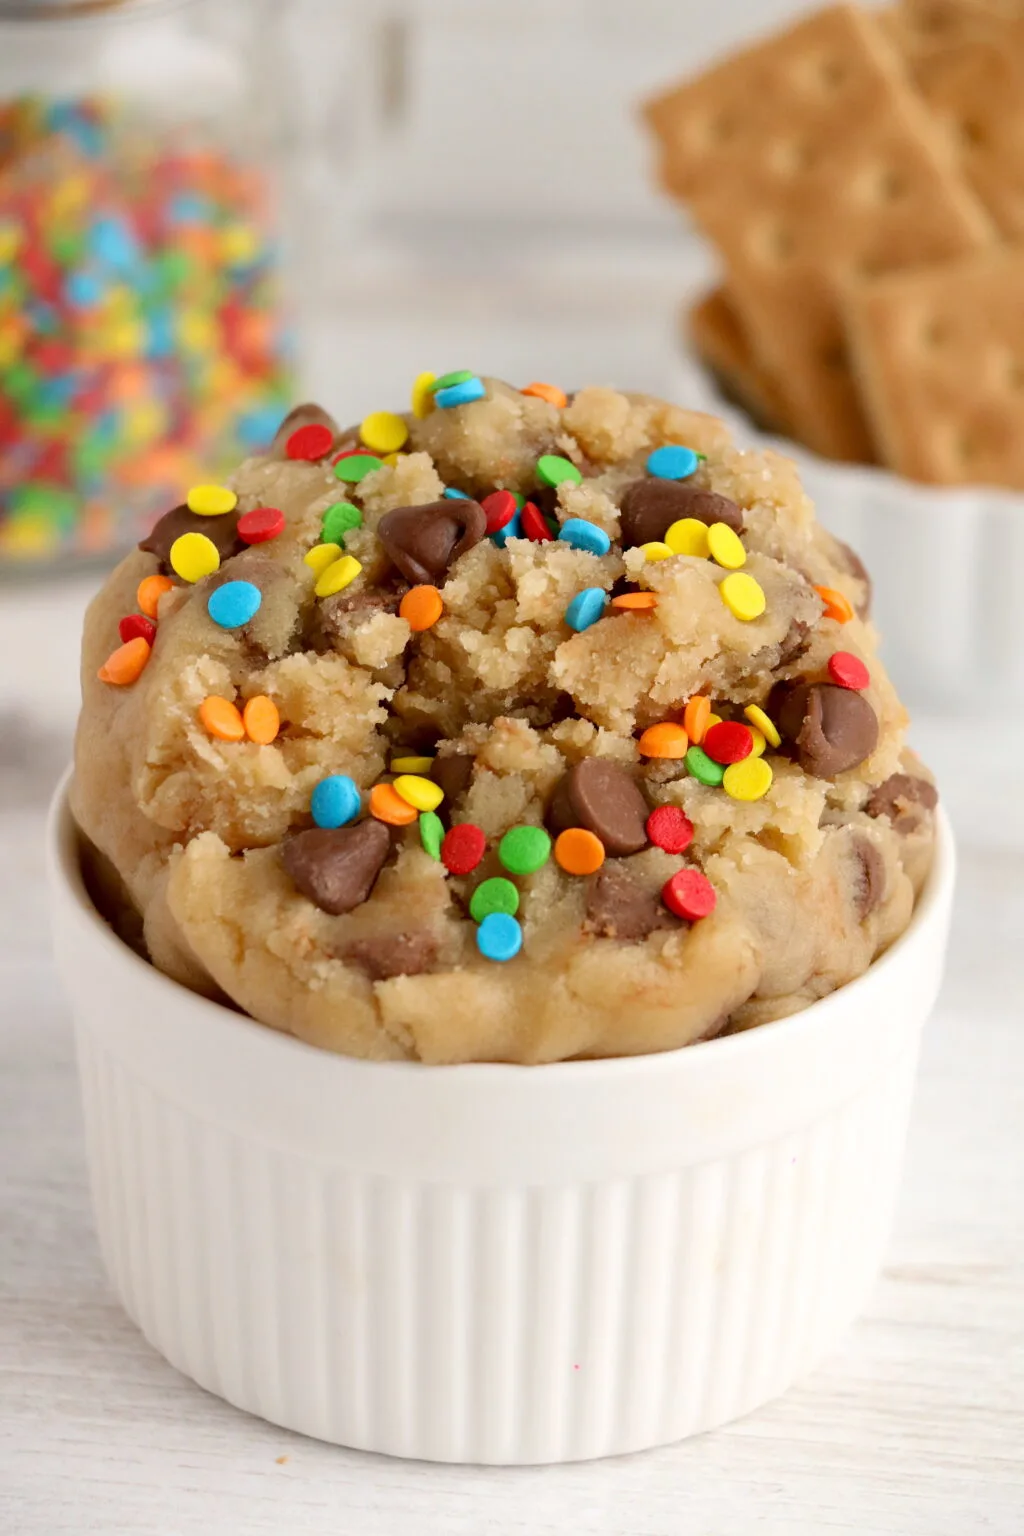 up close of edible chocolate chip cookie dough with rainbow sprinkles on top